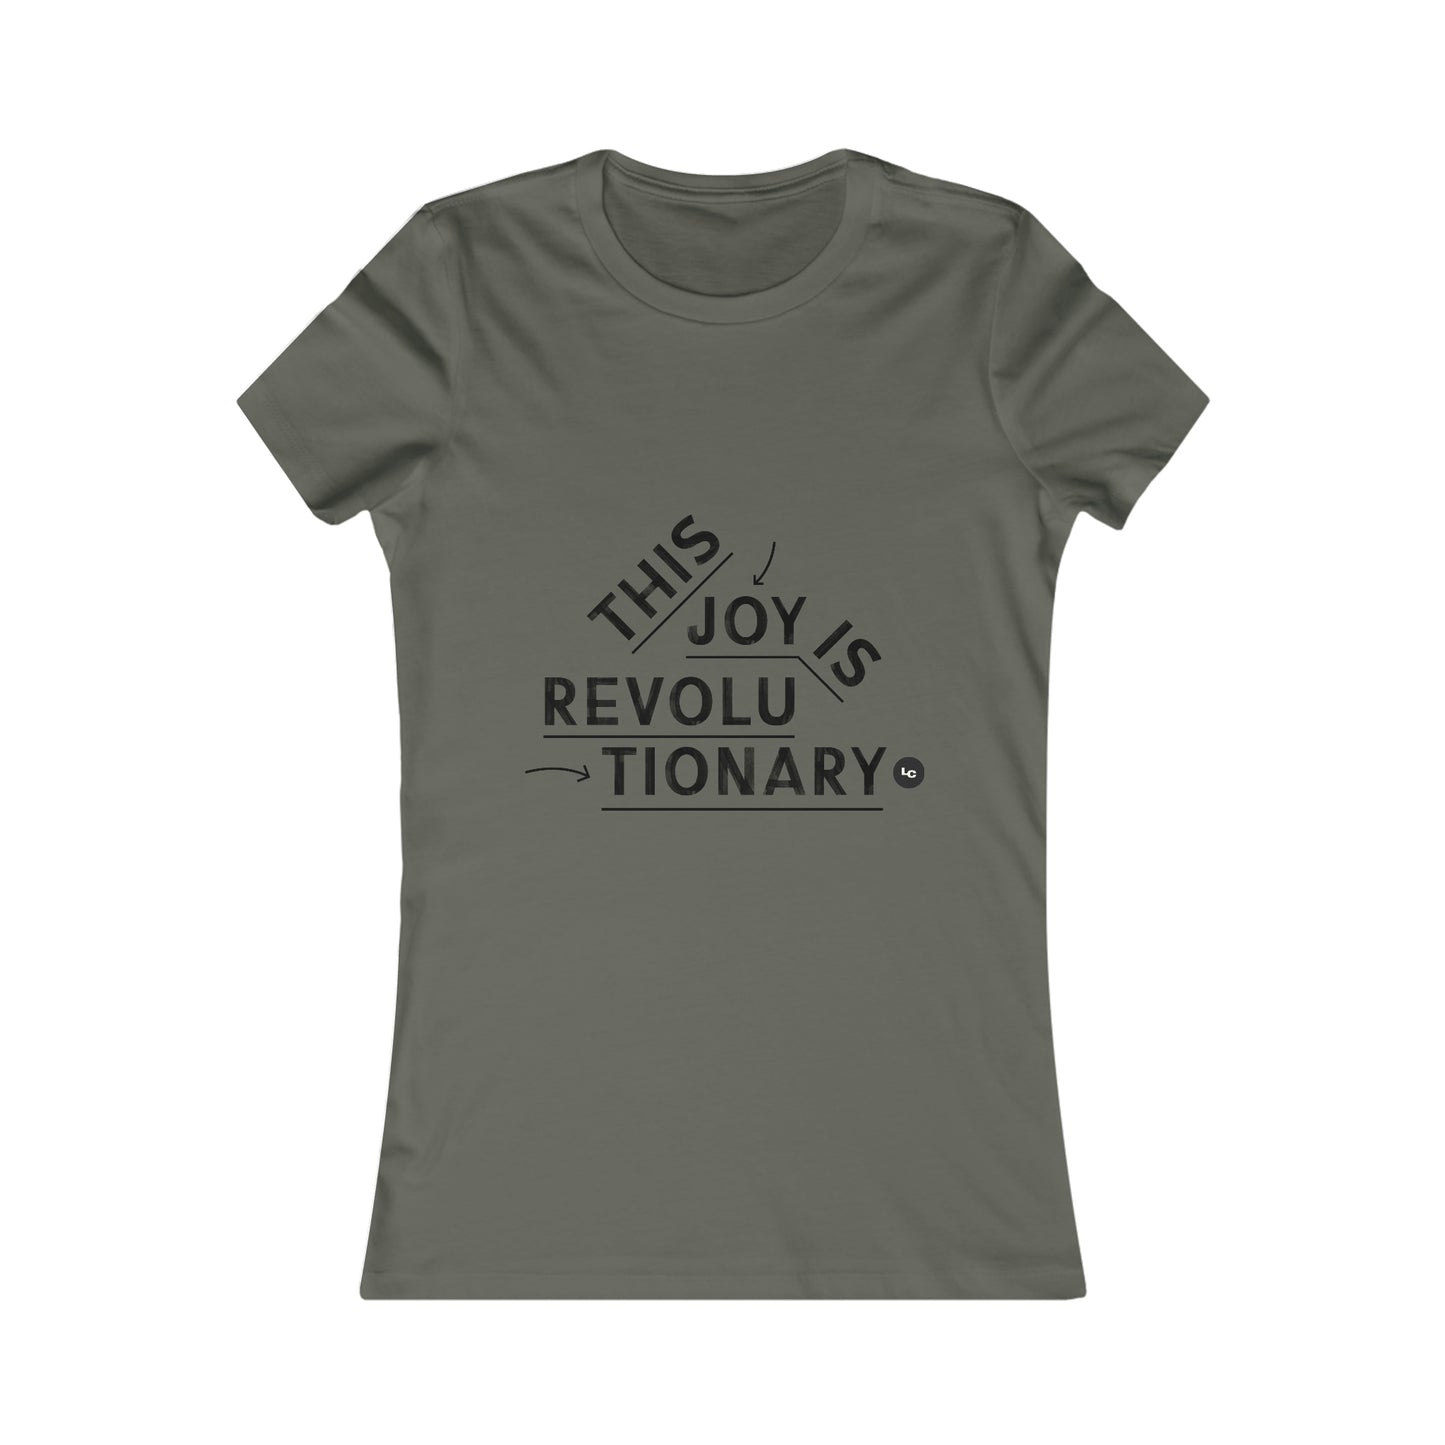 Our Joy is Revolutionary Tee